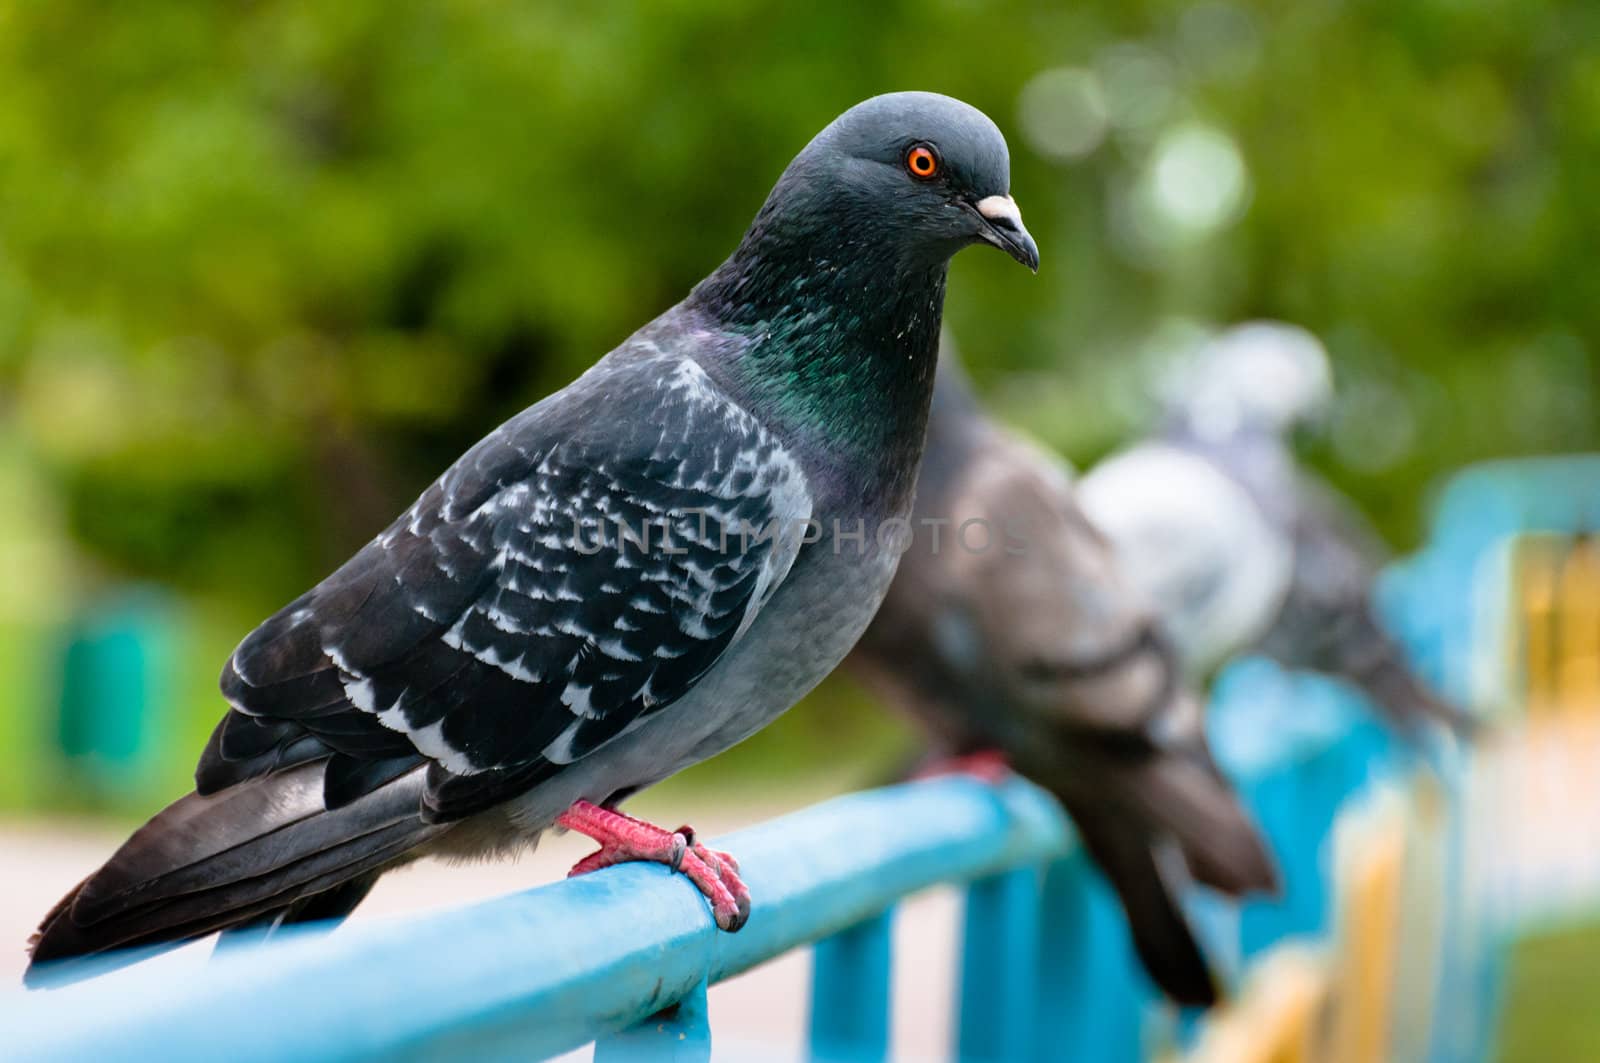 Pigeon sitting on support in park with blurry background